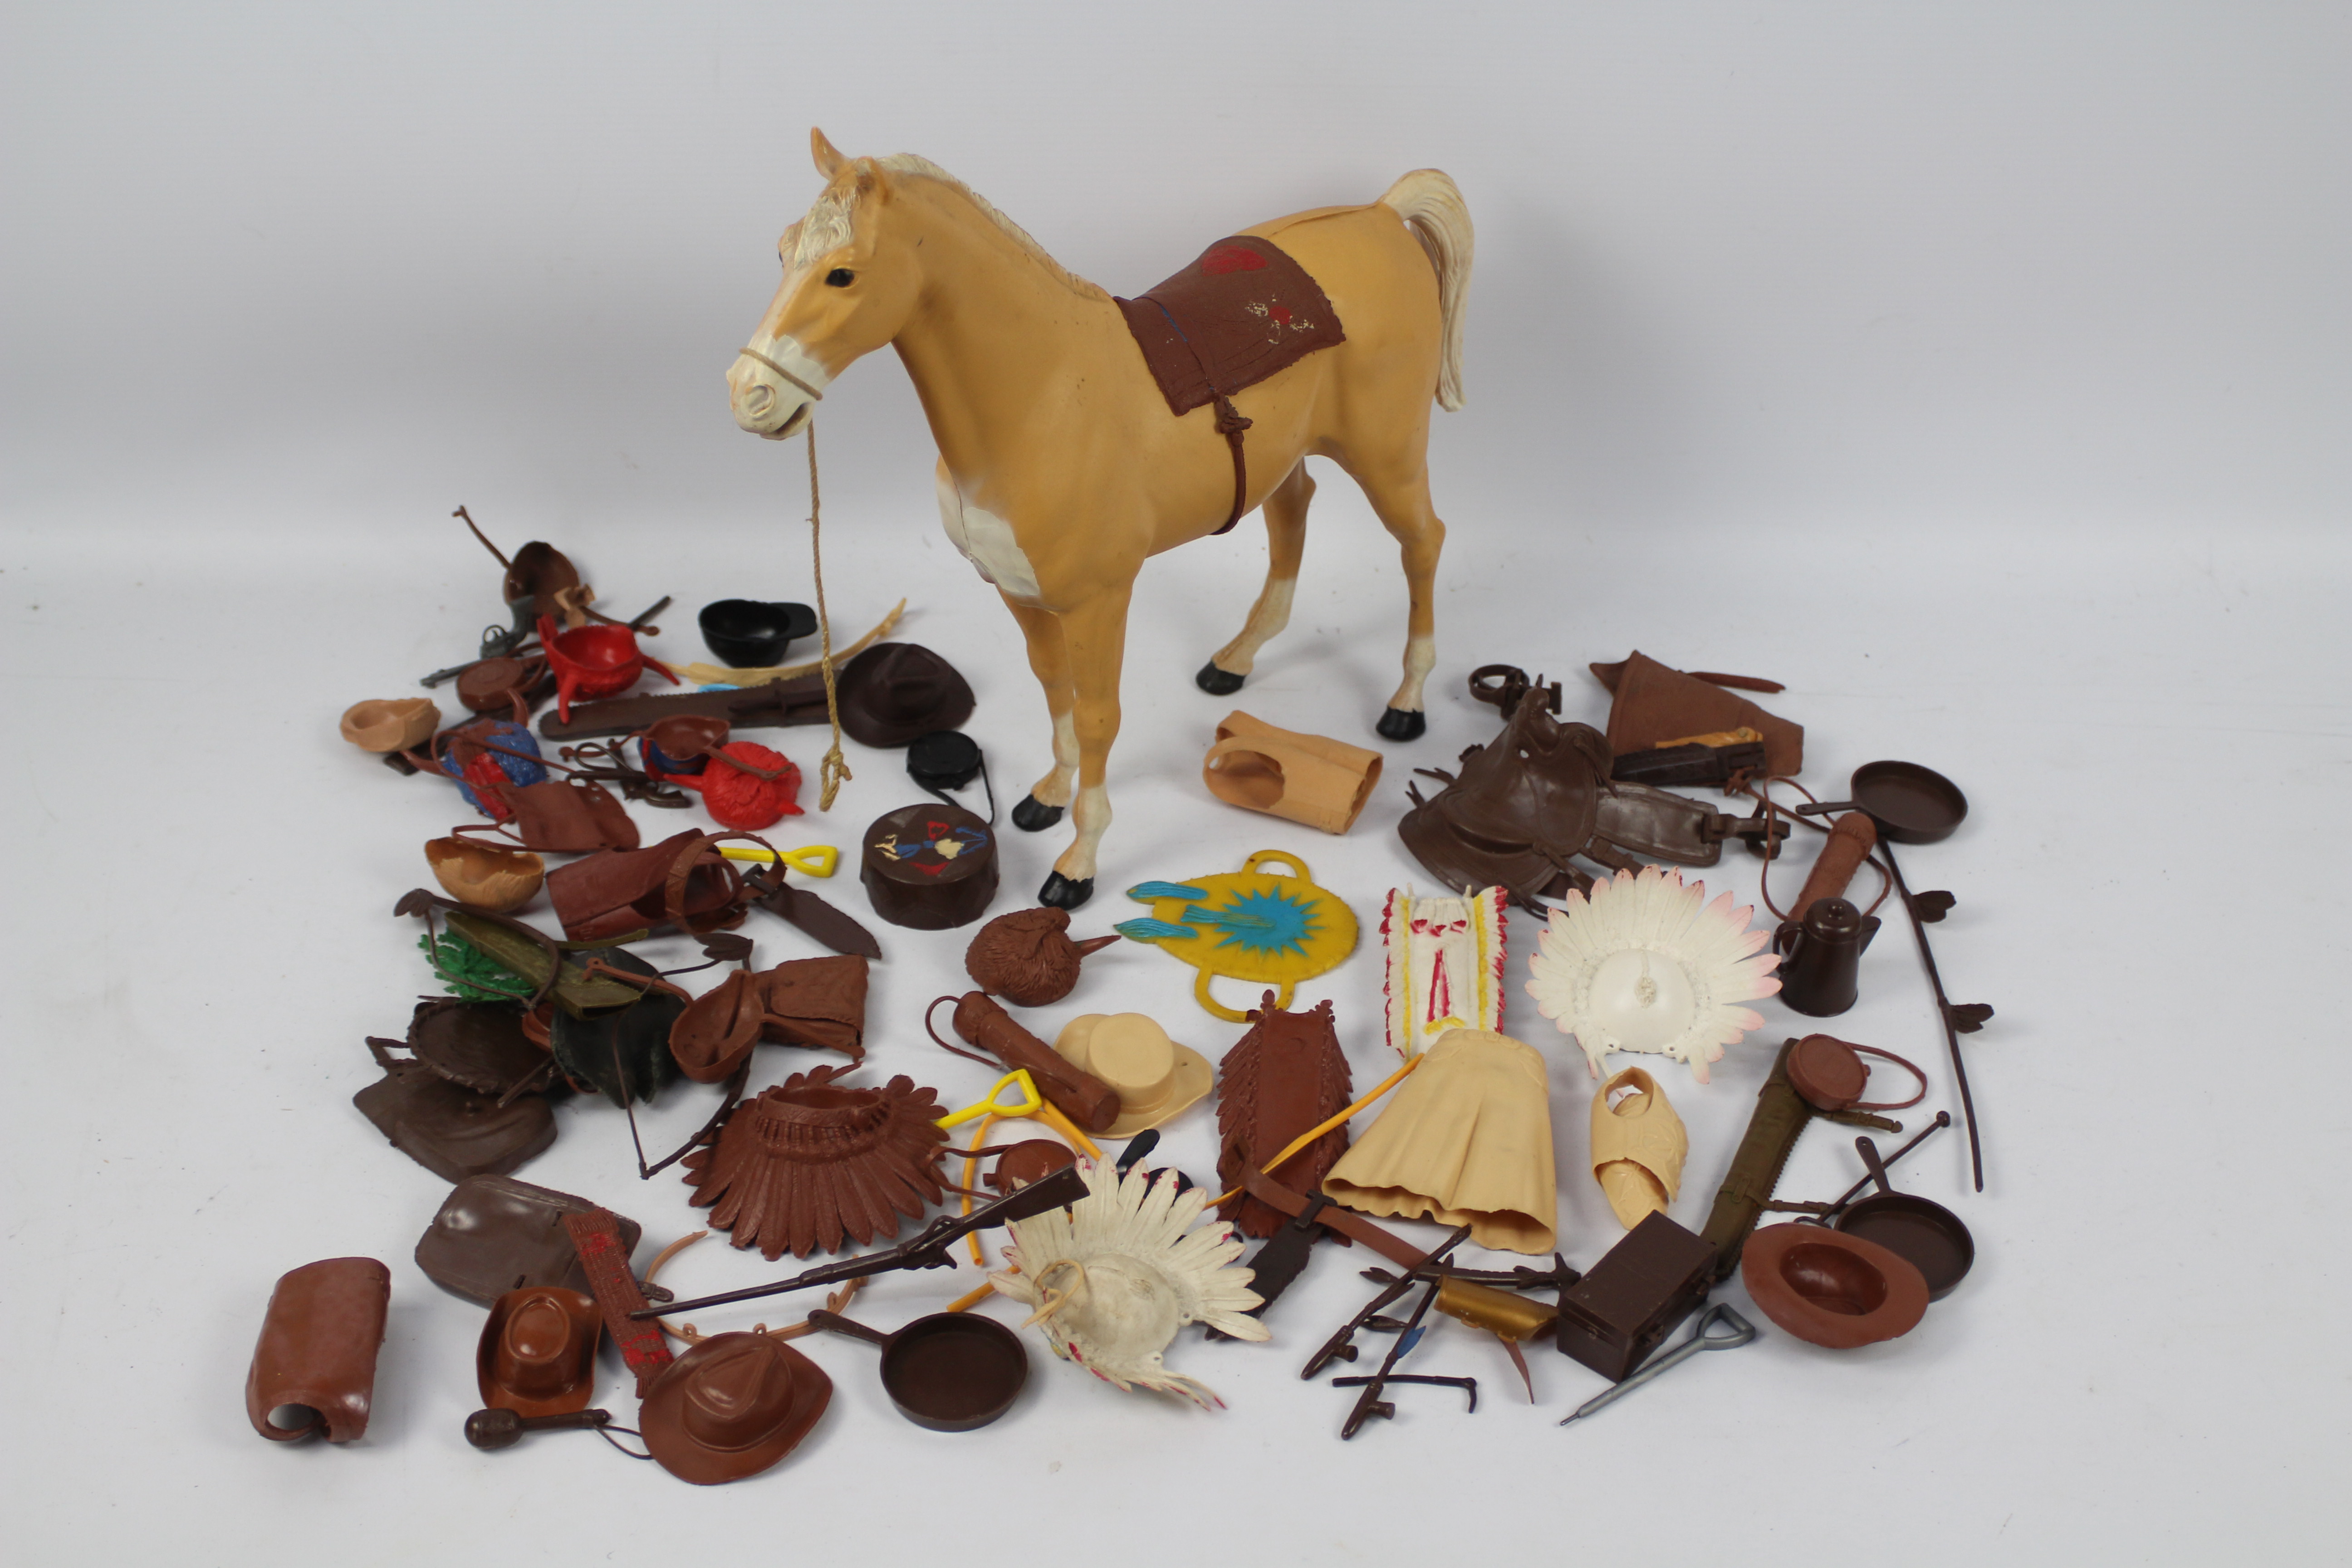 Marx - An unboxed Marx standing Palomino horse with an unboxed collection of Marx predominately